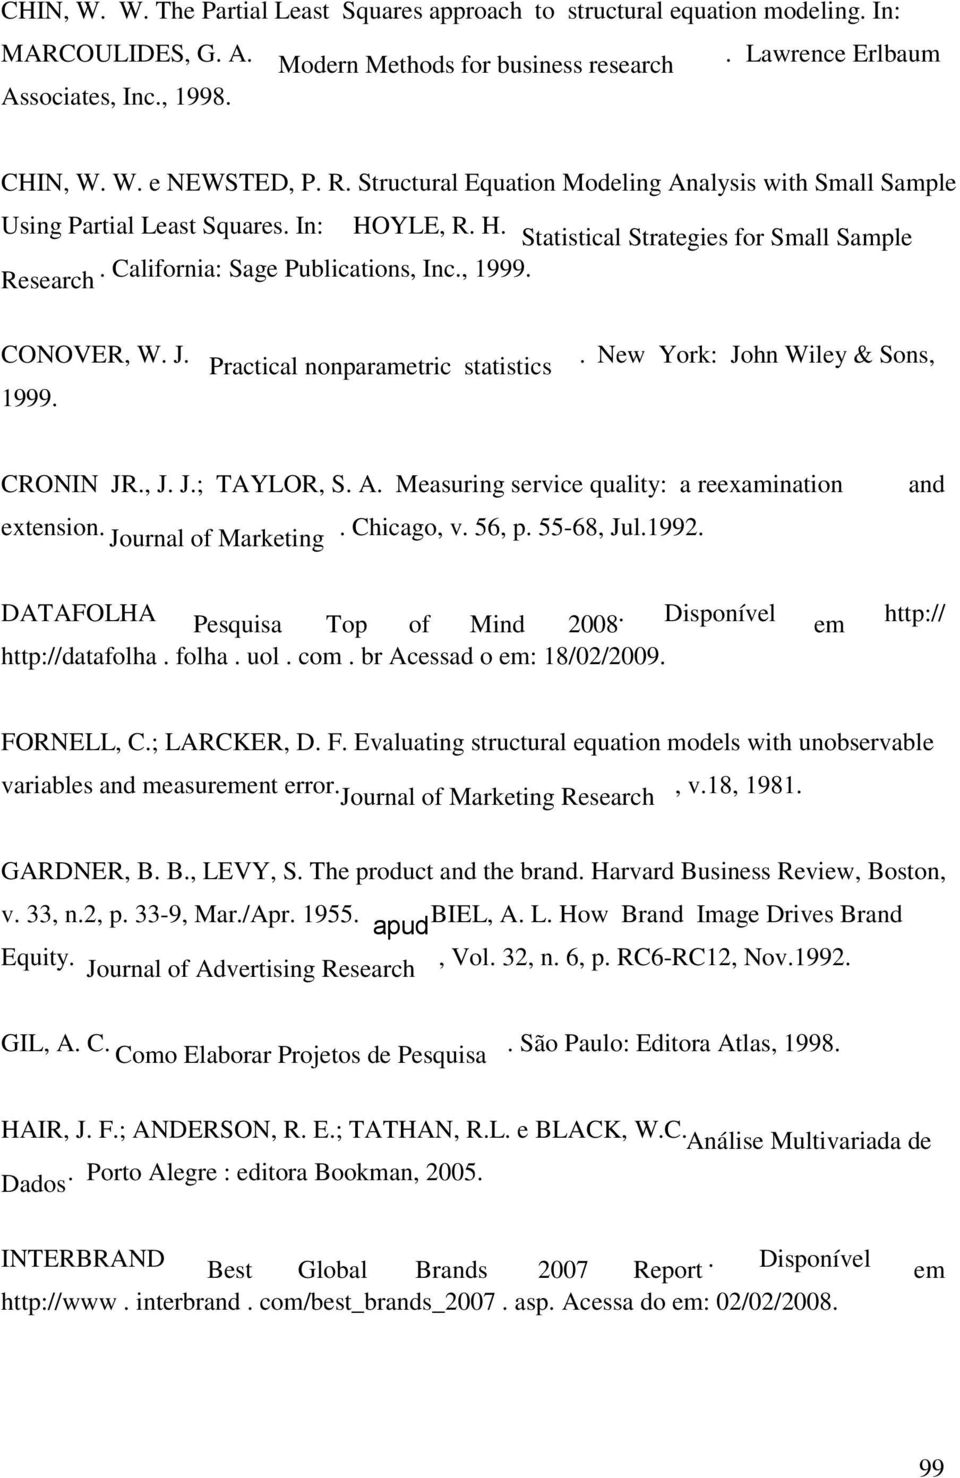 J. 19 99. Practical nonparametric statistics. New York: John Wiley & Sons, CRONIN JR., J. J.; TAYLOR, S. A. Measuring service quality: a reexamination extension. Journal of Marketing. Chicago, v.